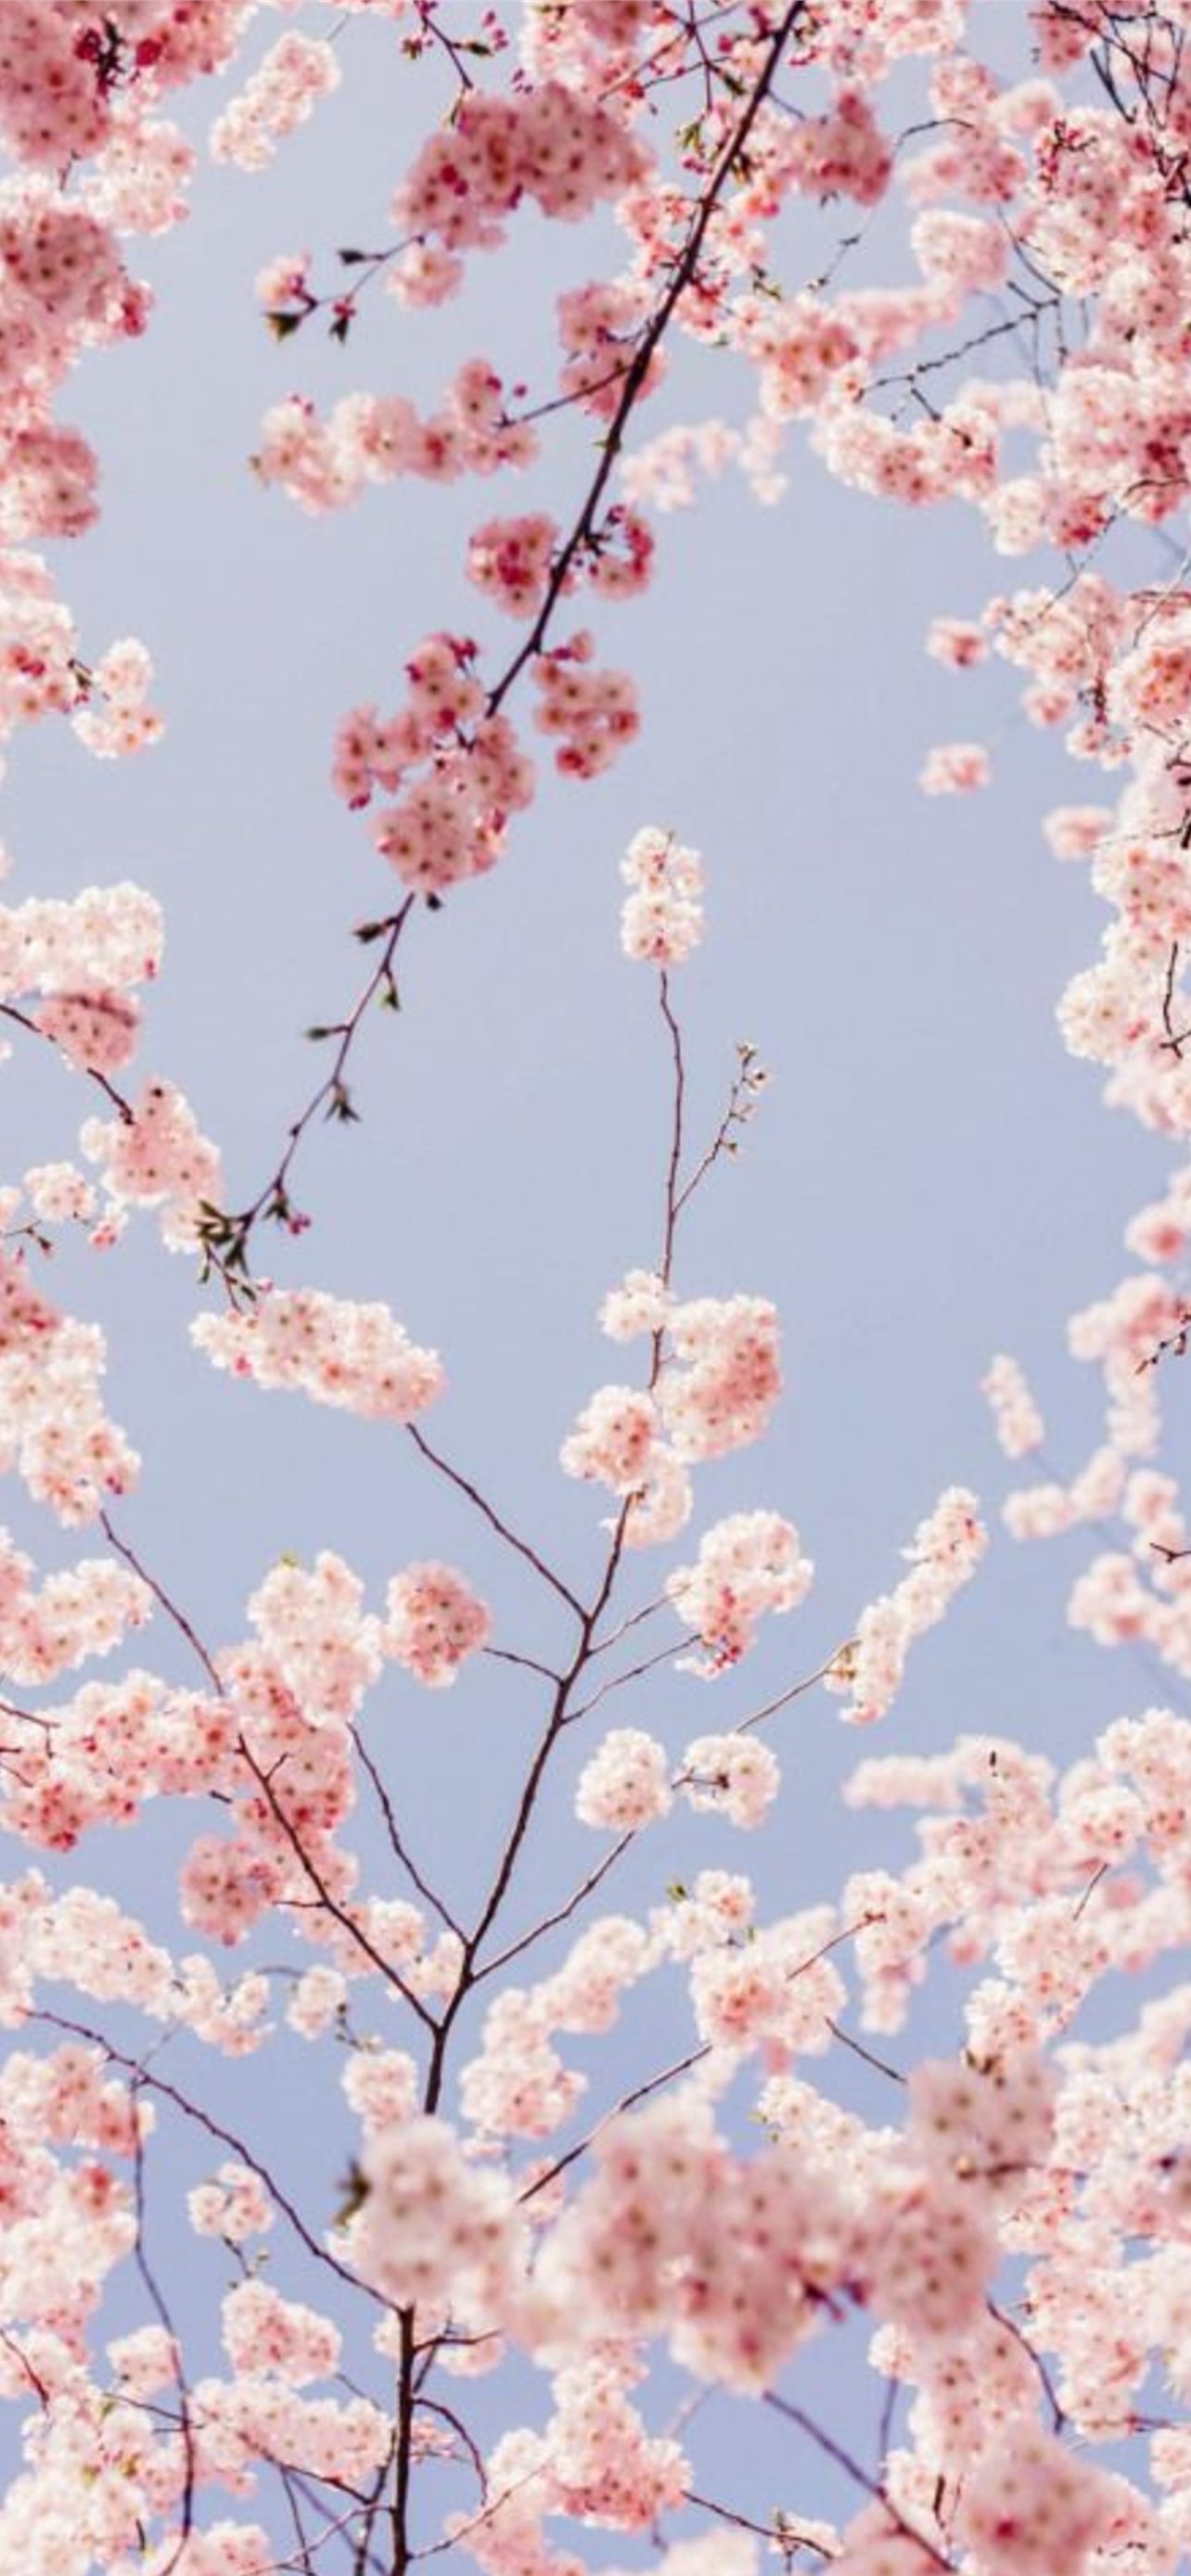 Romantic And Aesthetic Cherry Blossom Festival Background Wallpaper Image  For Free Download  Pngtree